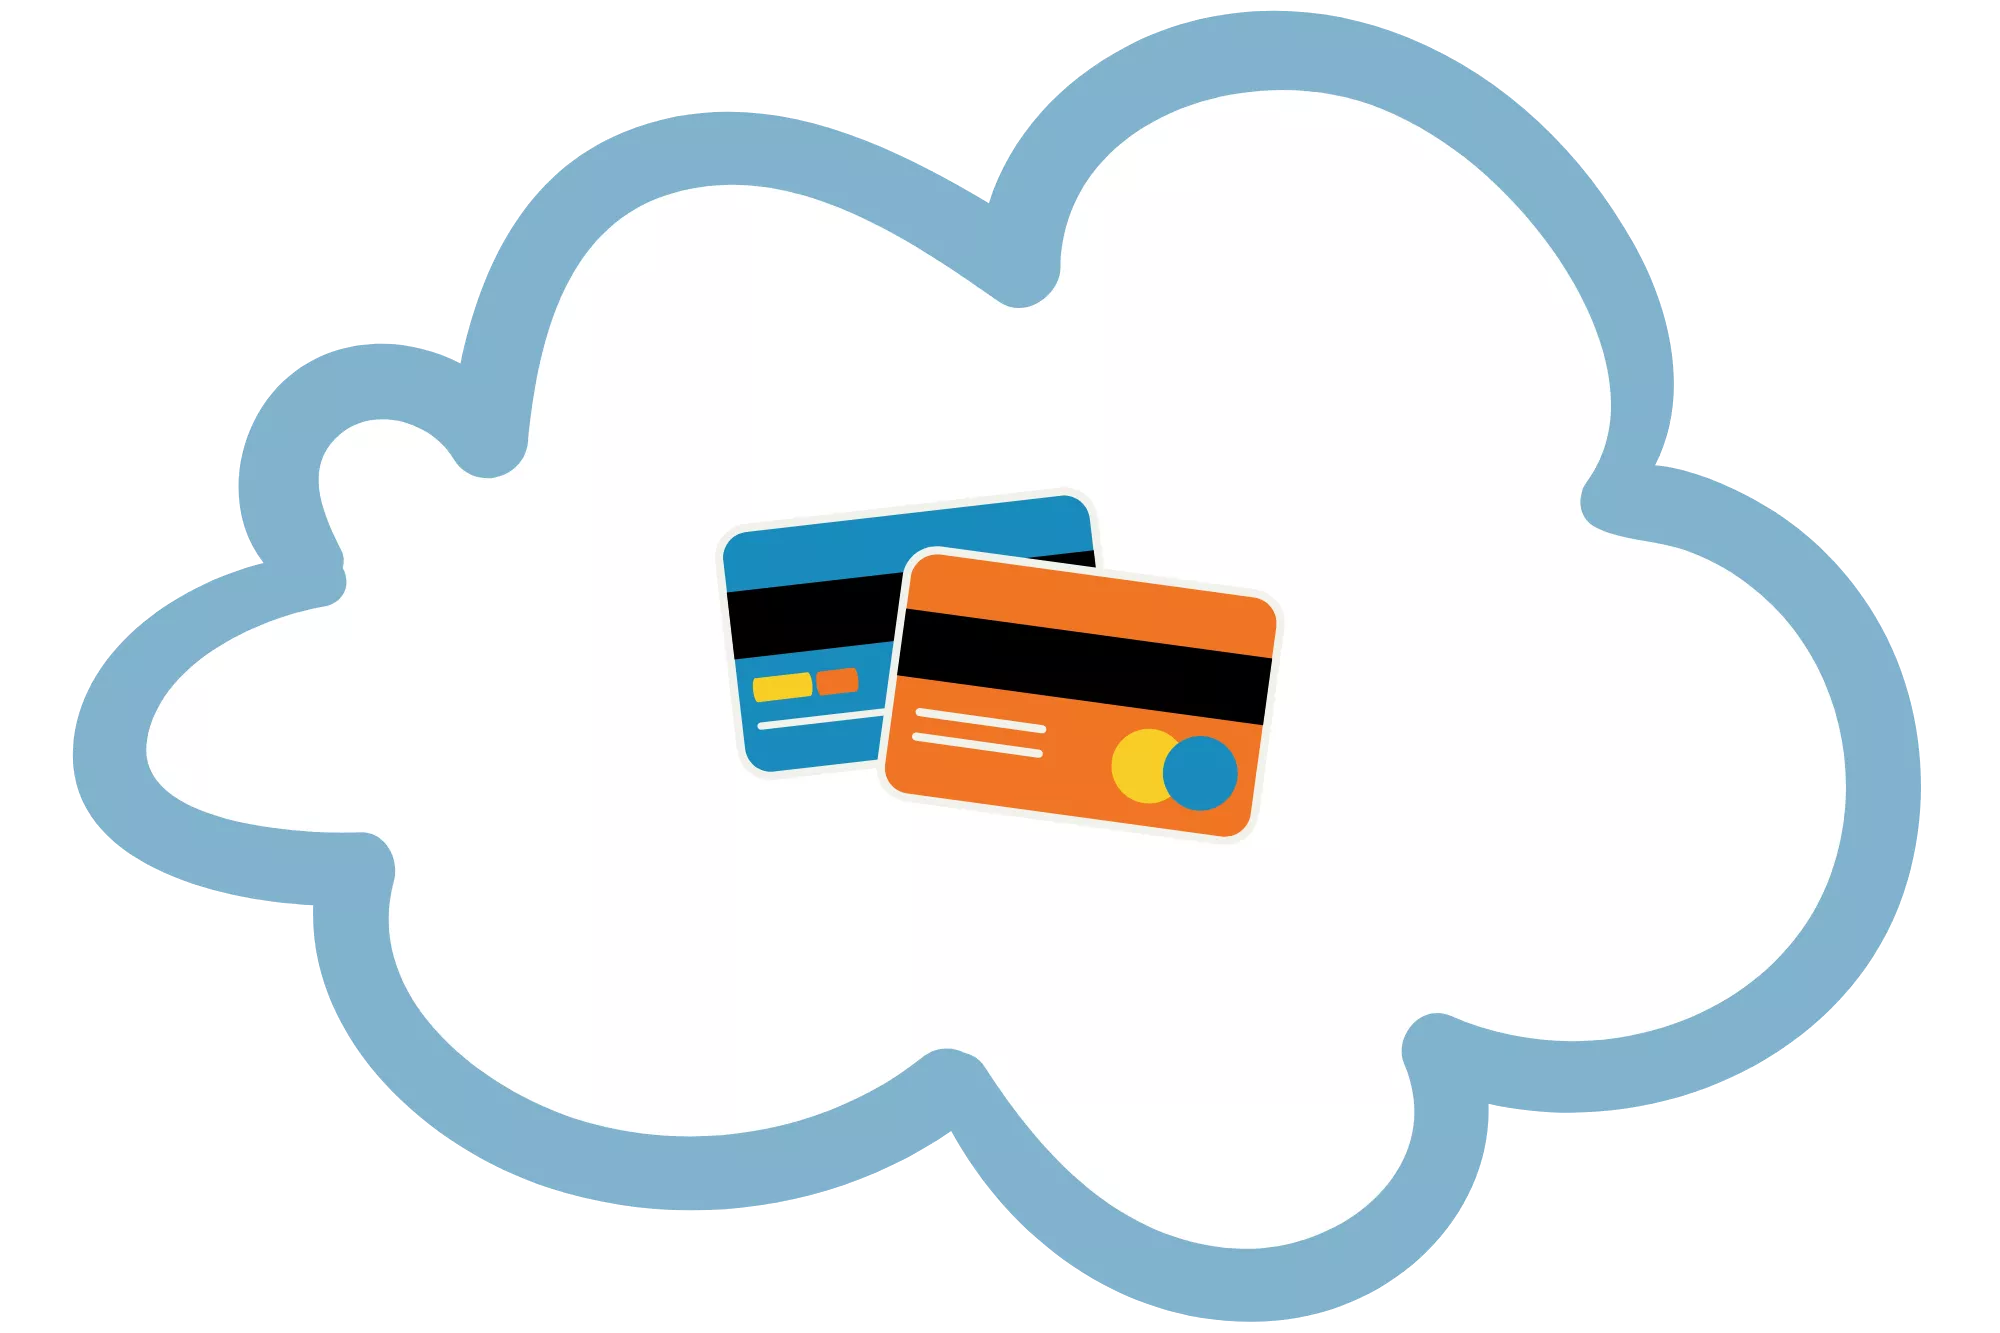 A cloud with credit cards in it to represent Transport Layer Security.